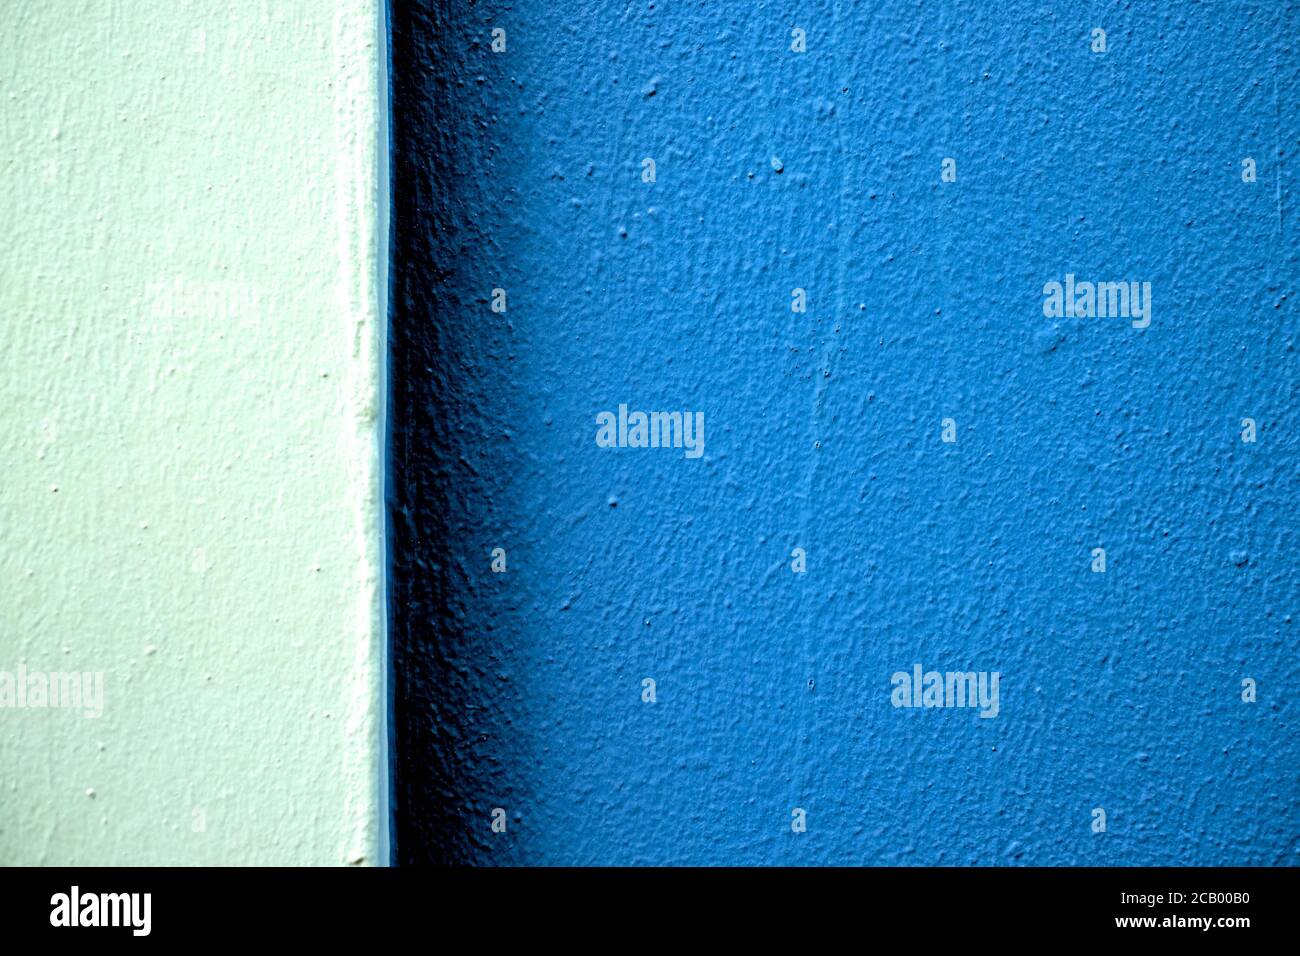 Two tones of blue color bands on a freshly painted wall in hard light, offset with large darker part. Stock Photo